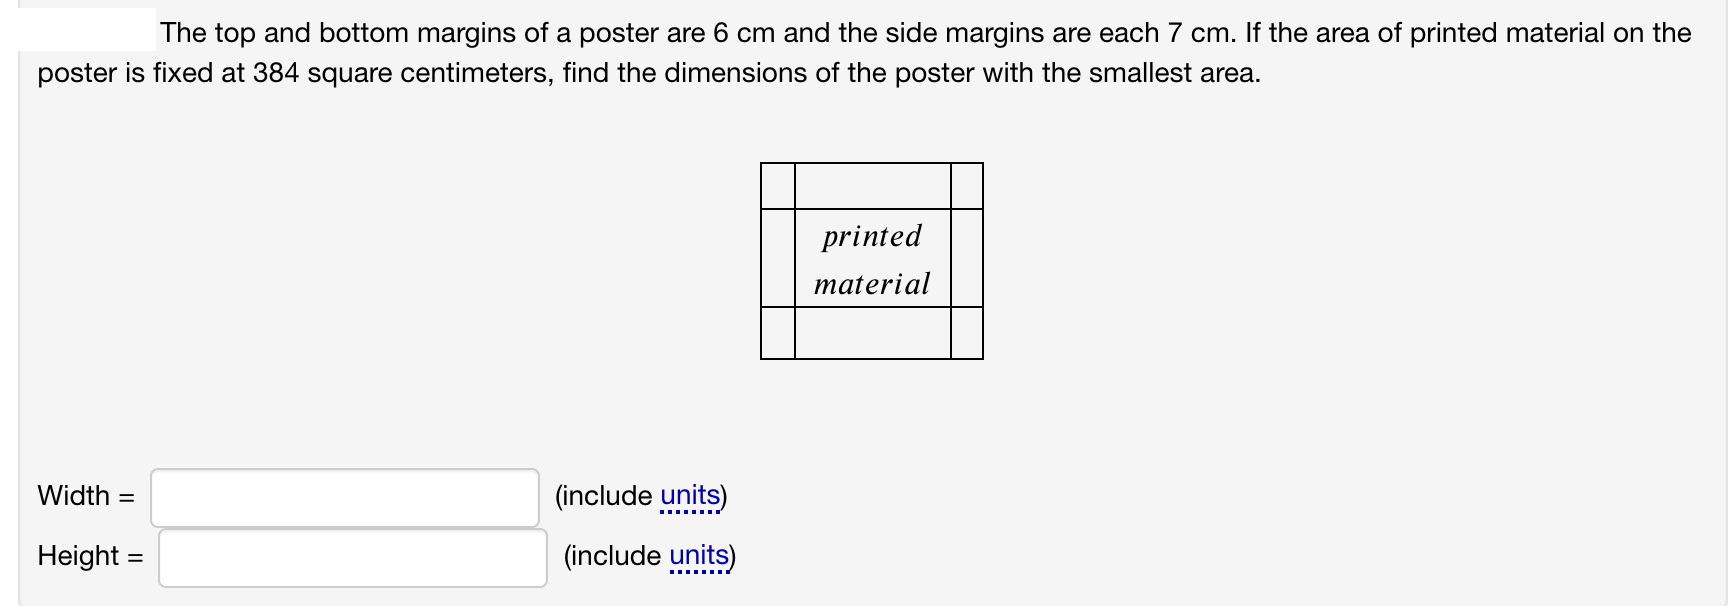 The top and bottom margins of a poster are 6 cm and the side margins are each 7 cm. If the area of printed material on the
poster is fixed at 384 square centimeters, find the dimensions of the poster with the smallest area.
